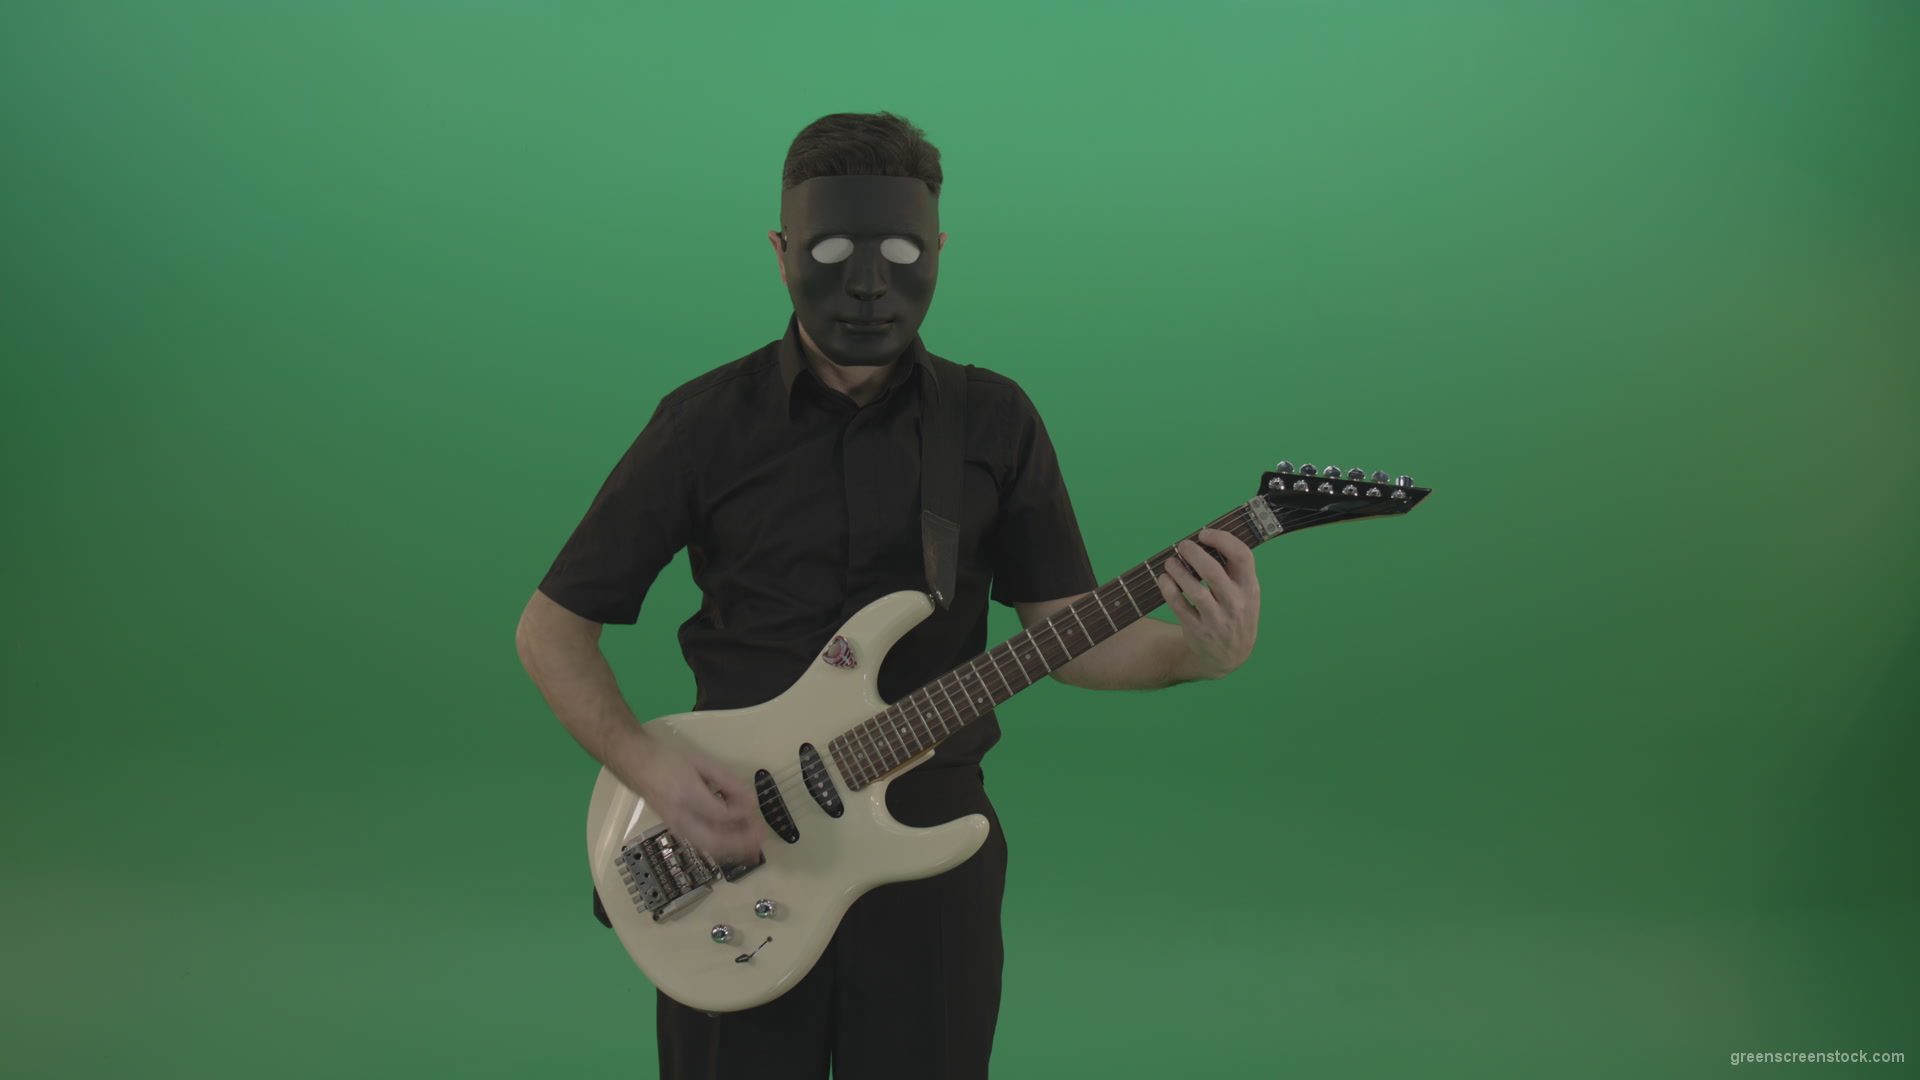 Hard-rock-guitarist-man-playing-white-guitar-in-black-mask-isolated-on-green-background_006 Green Screen Stock